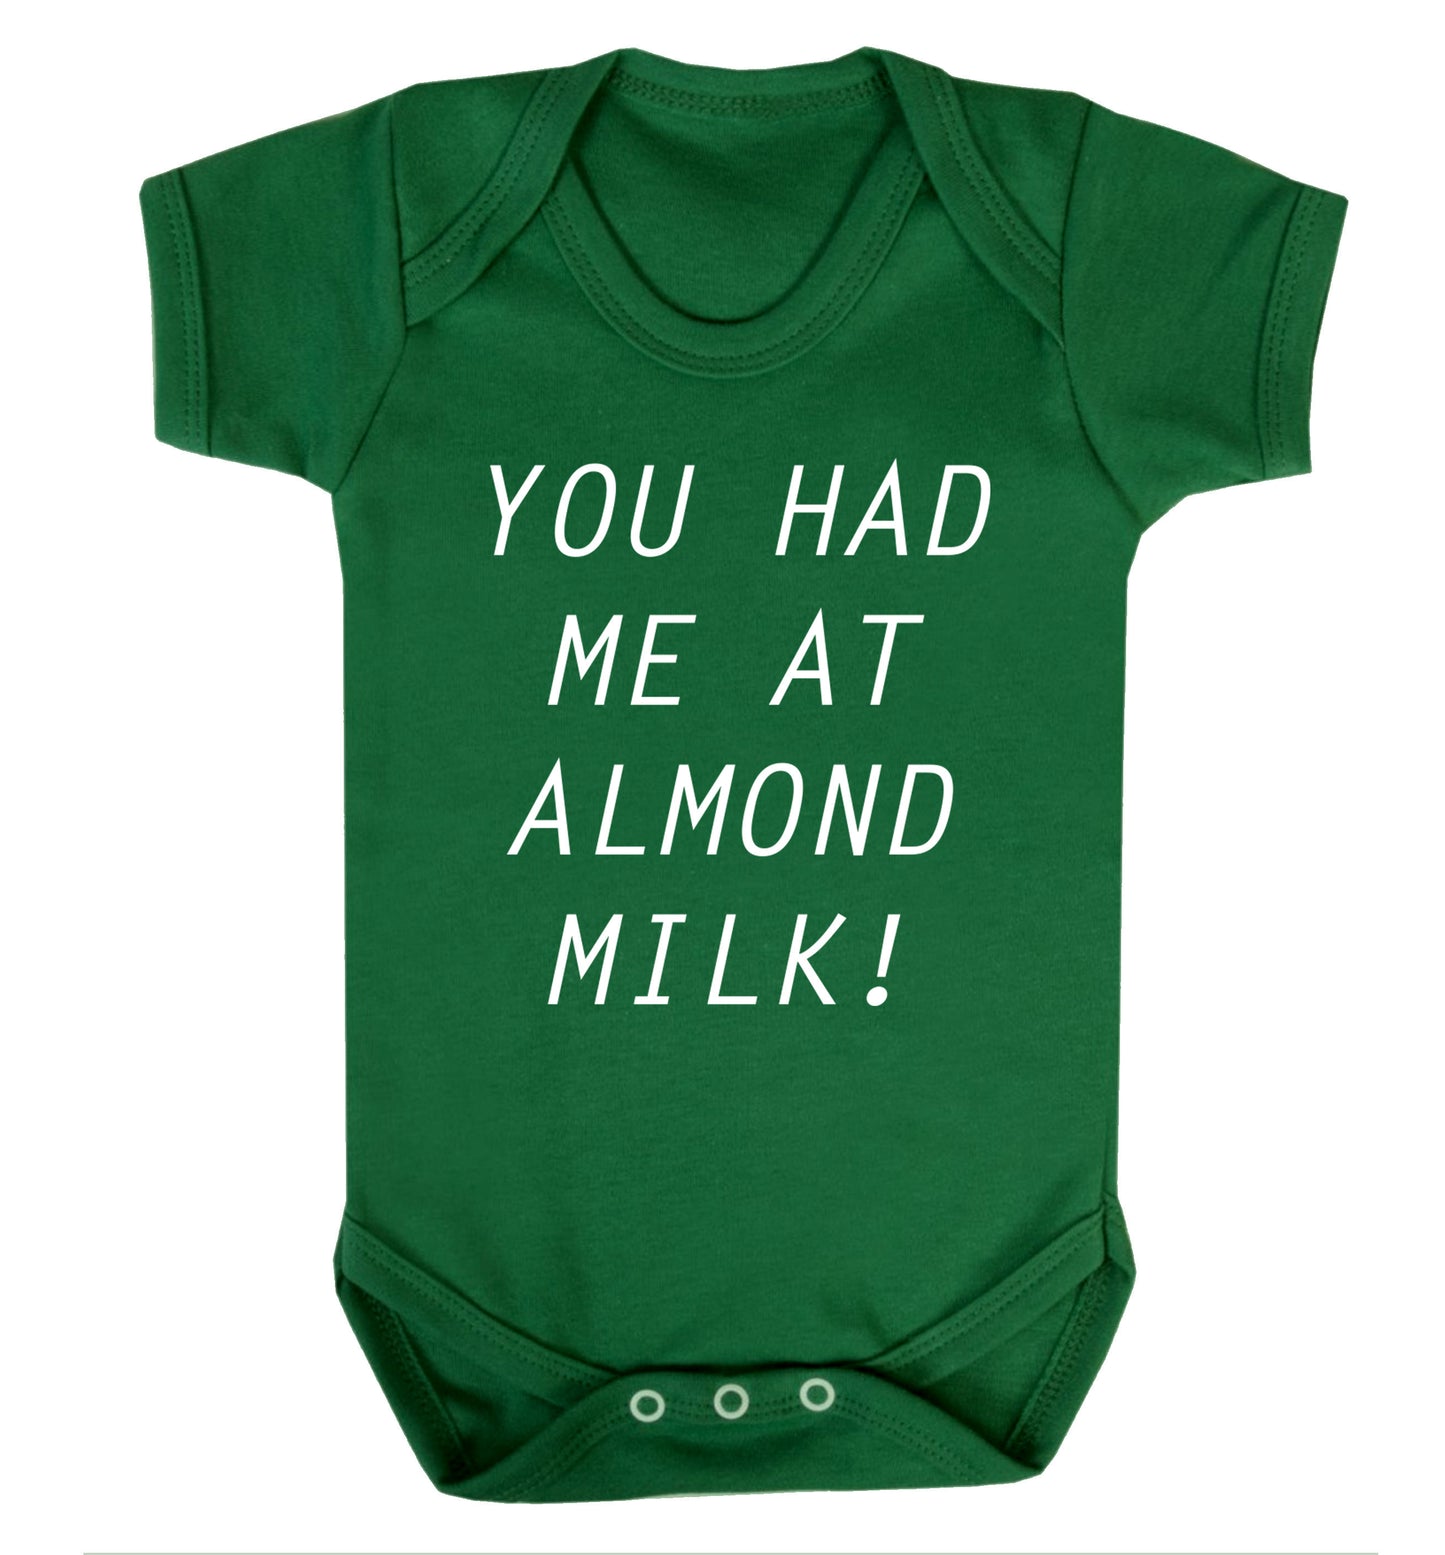 You had me at almond milk Baby Vest green 18-24 months